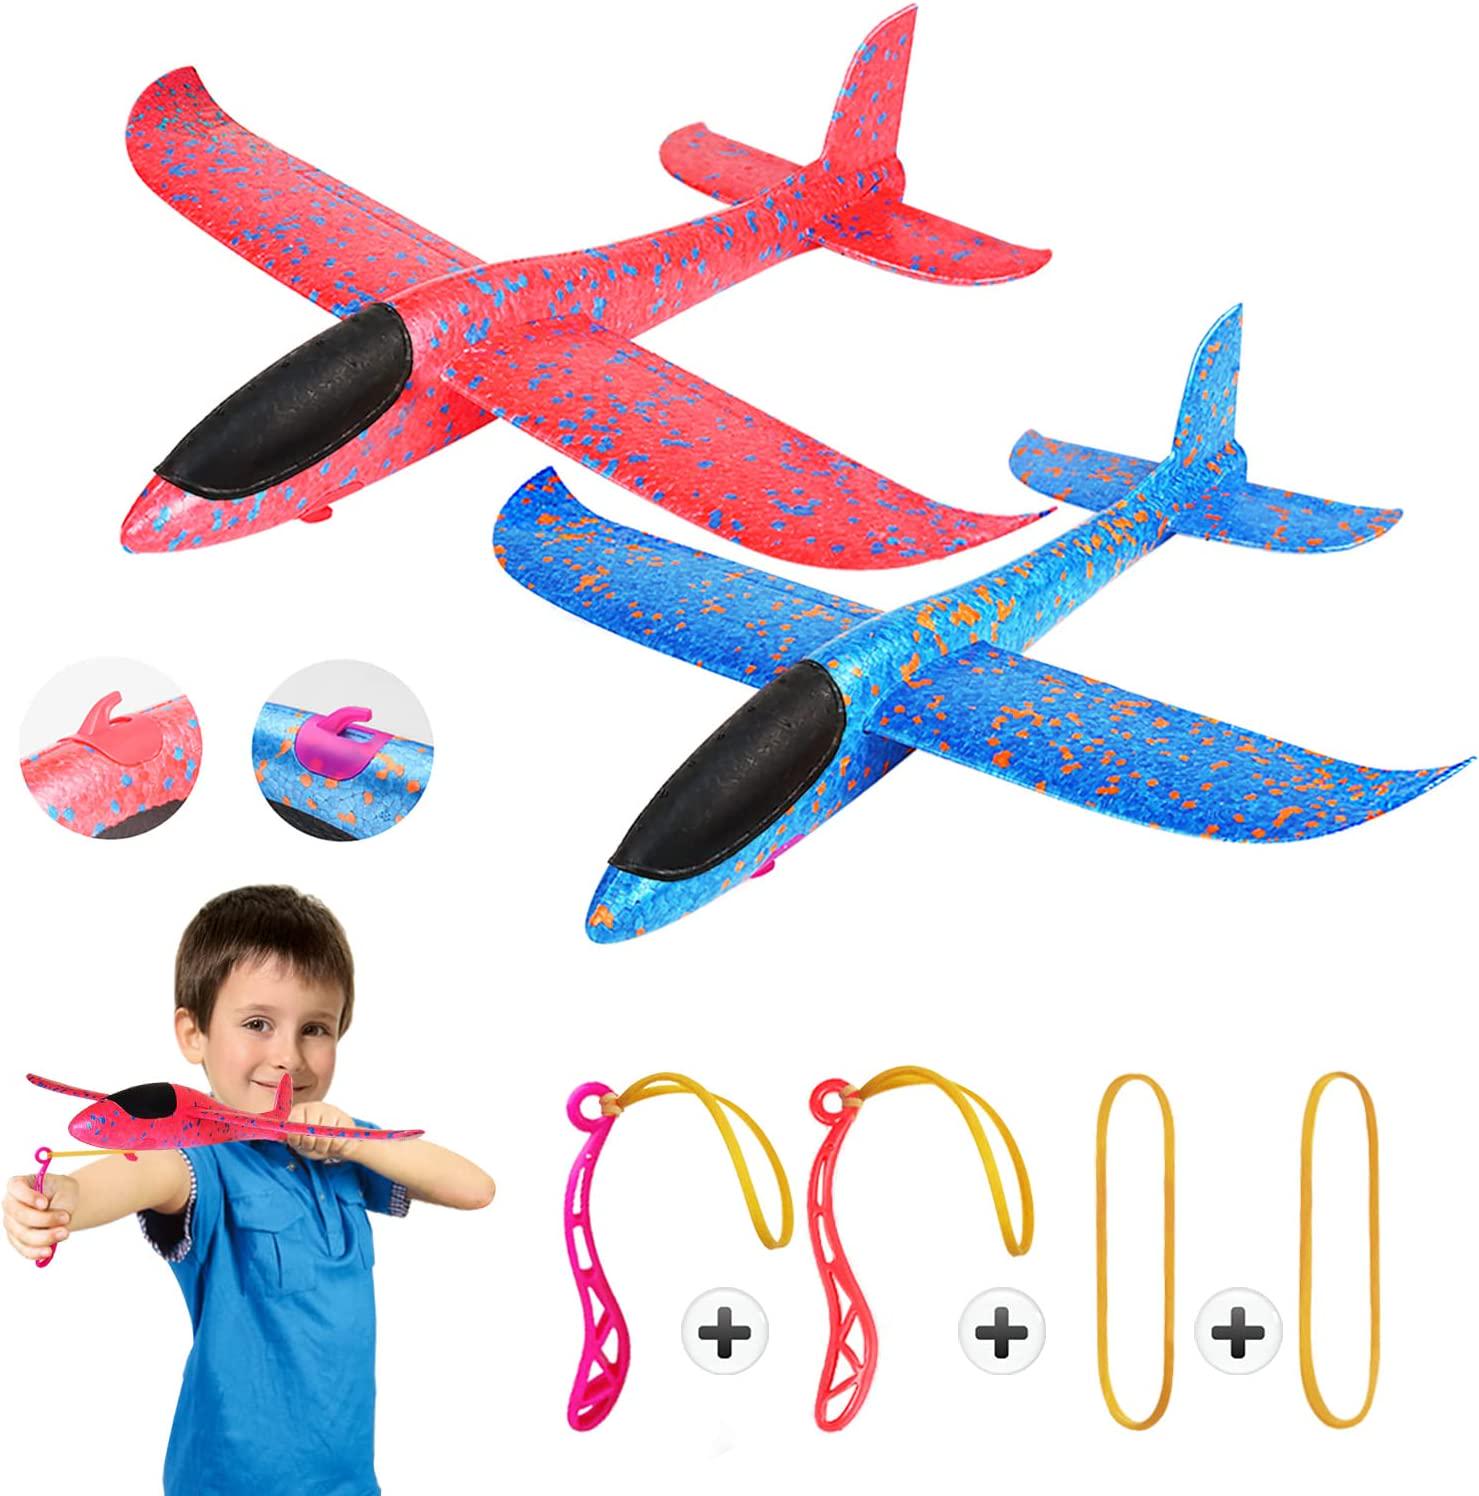 MIMIDOU, MIMIDOU New Aerobatic Slingshot Plane 2 Flight Mode 2 Pack Glider Airplane Throwing Foam Aircraft Outdoor Sports Flying Toy for Kids as Gift,by